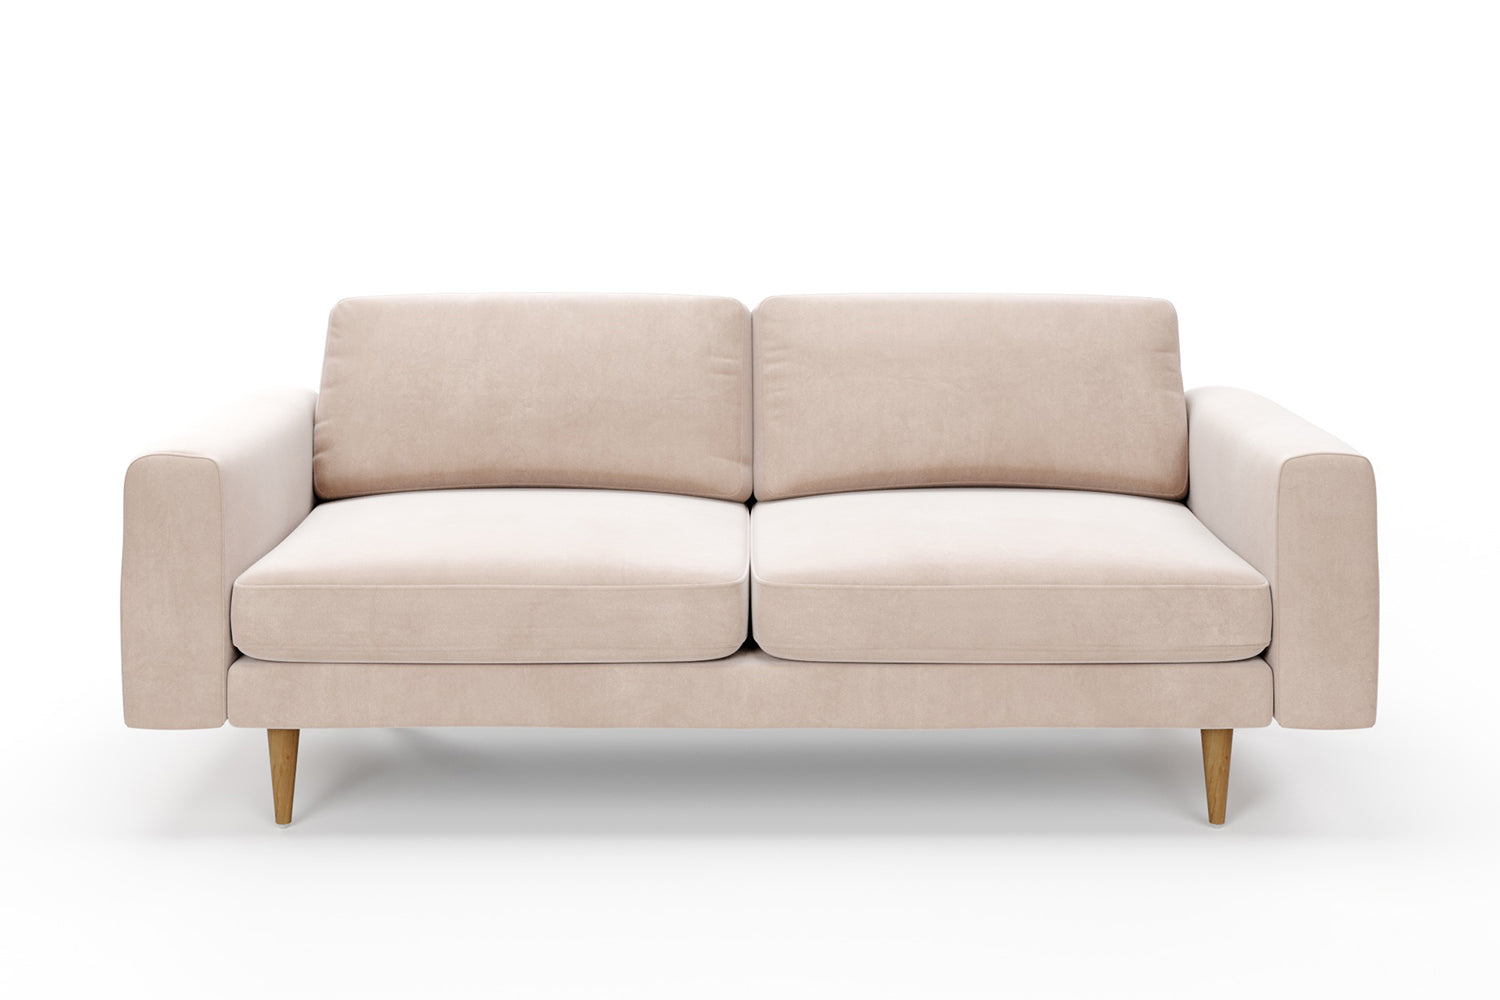 SNUG | The Big Chill 3 Seater Sofa in Taupe variant_40414879121456